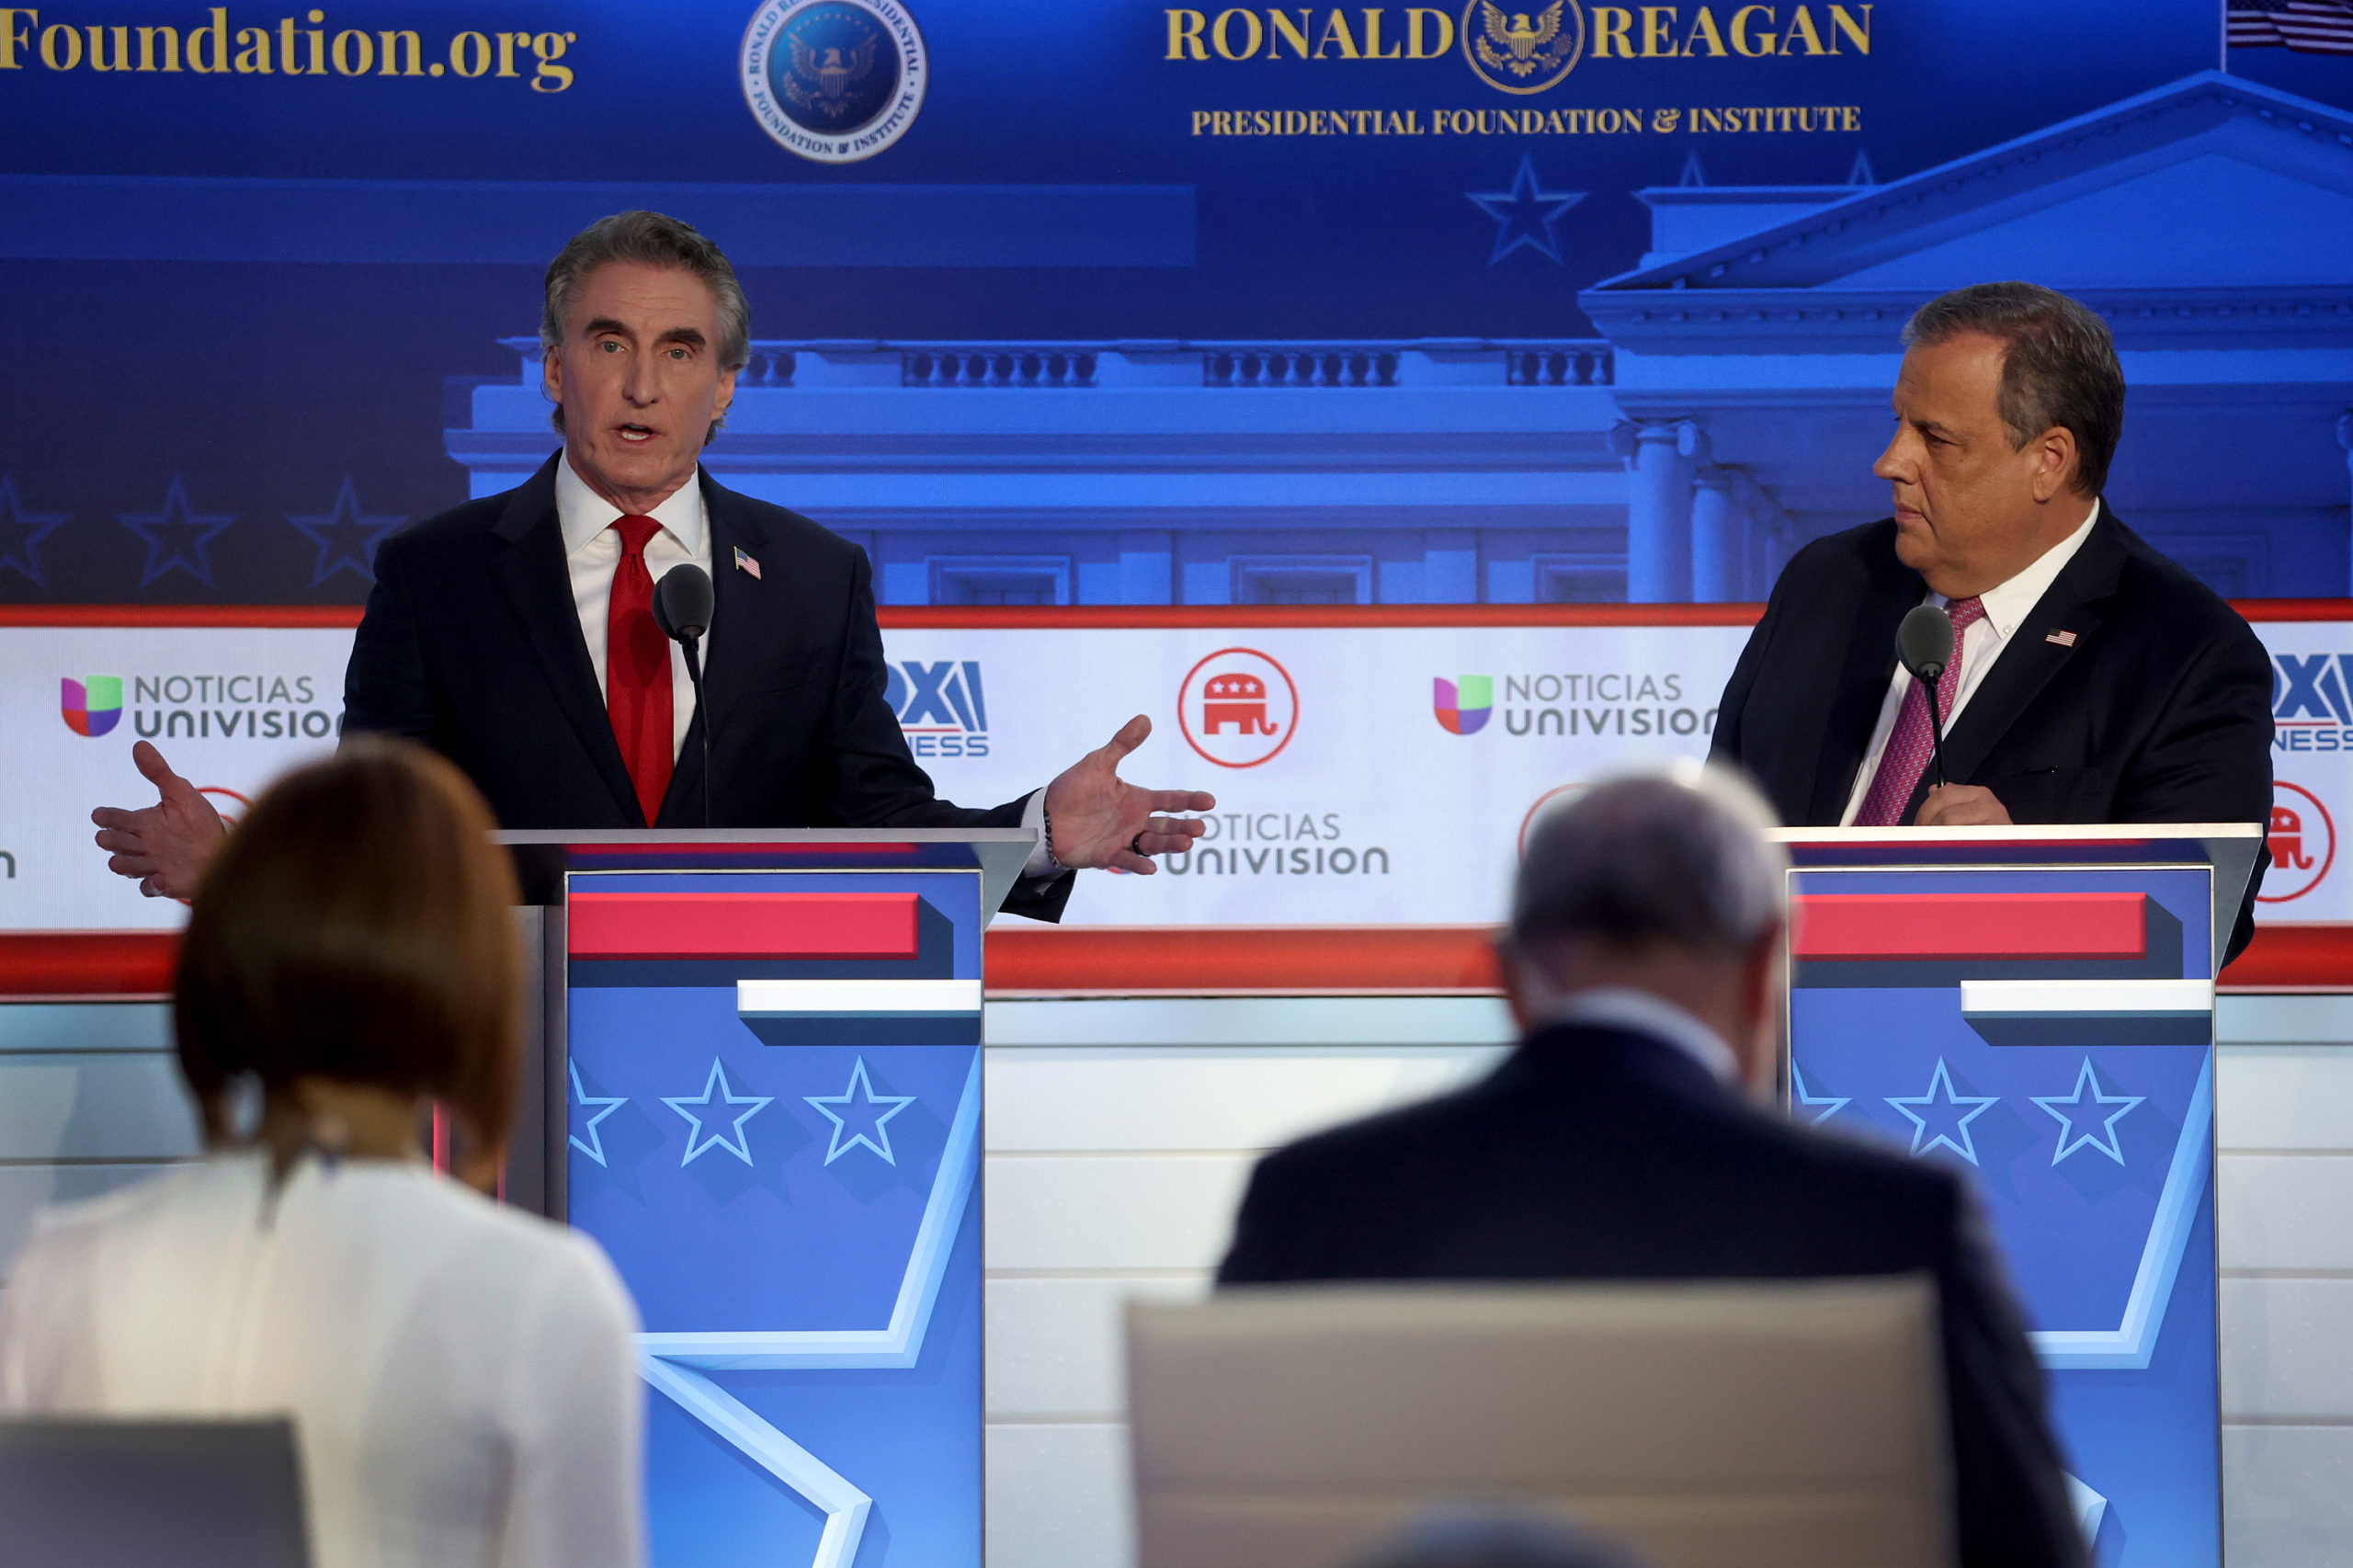 SIMI VALLEY, CALIFORNIA - SEPTEMBER 27: Republican presidential candidates (L-R), North Dakota Gov. Doug Burgum and former New Jersey Gov. Chris Christie participate in the FOX Business Republican Primary Debate at the Ronald Reagan Presidential Library on September 27, 2023 in Simi Valley, California. Seven presidential hopefuls squared off in the second Republican primary debate as former U.S. President Donald Trump, currently facing indictments in four locations, declined again to participate. (Photo by Justin Sullivan/Getty Images)